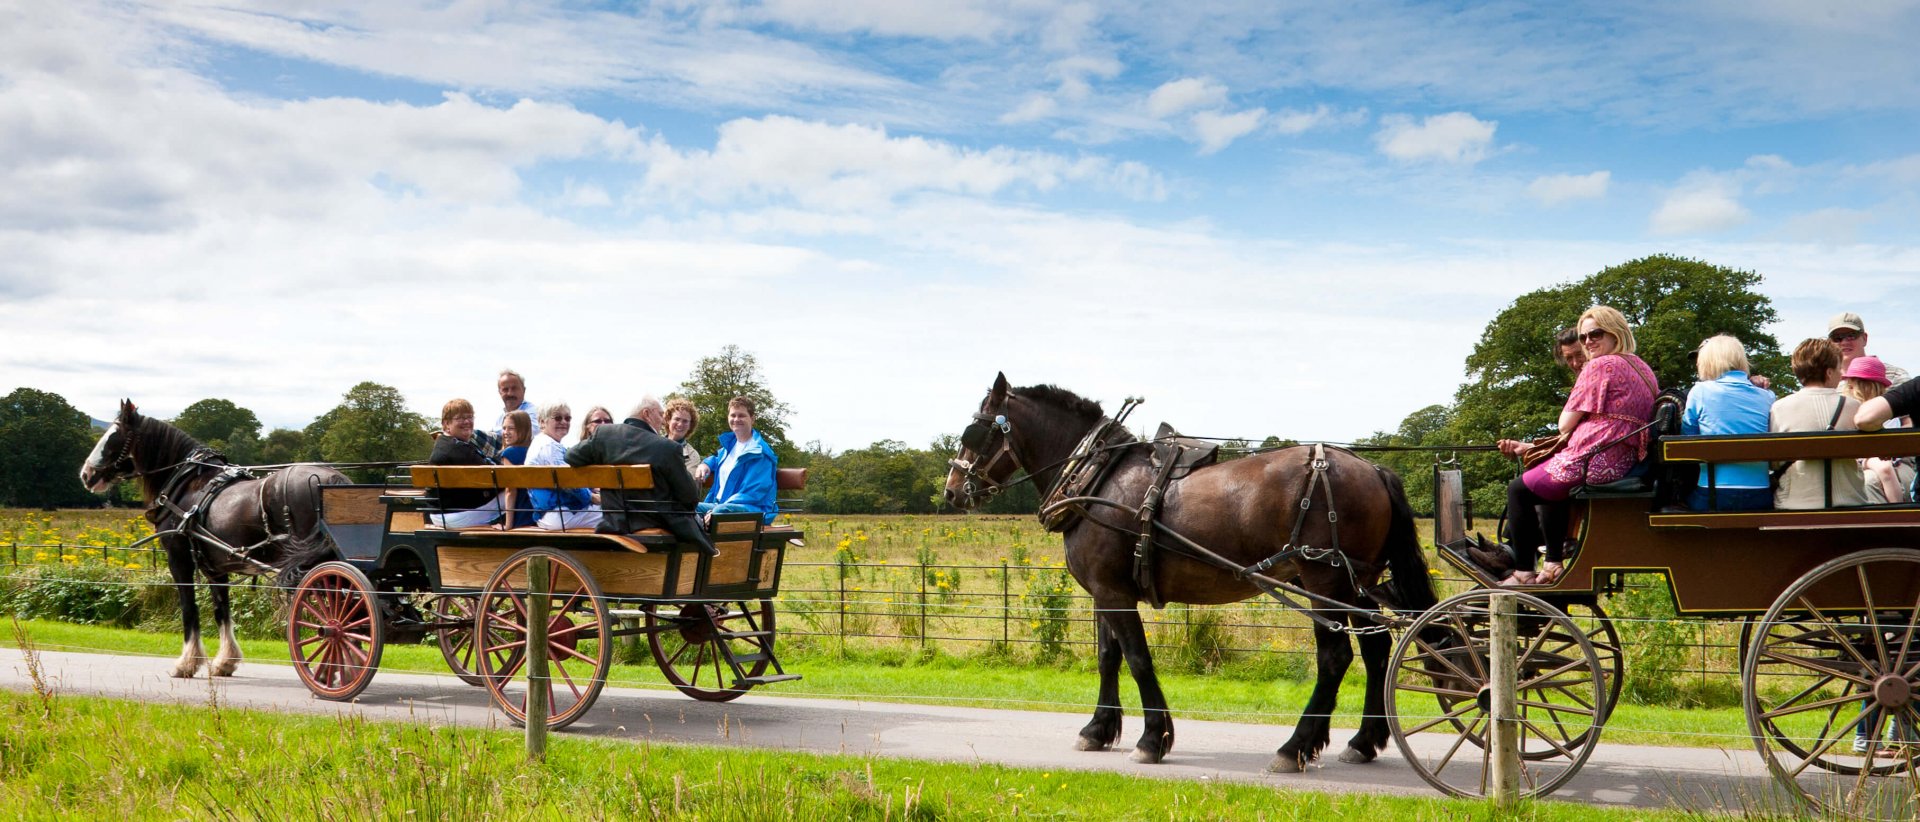 Two carriages with horses, drivers and passengers in Killarney National Park in Ireland